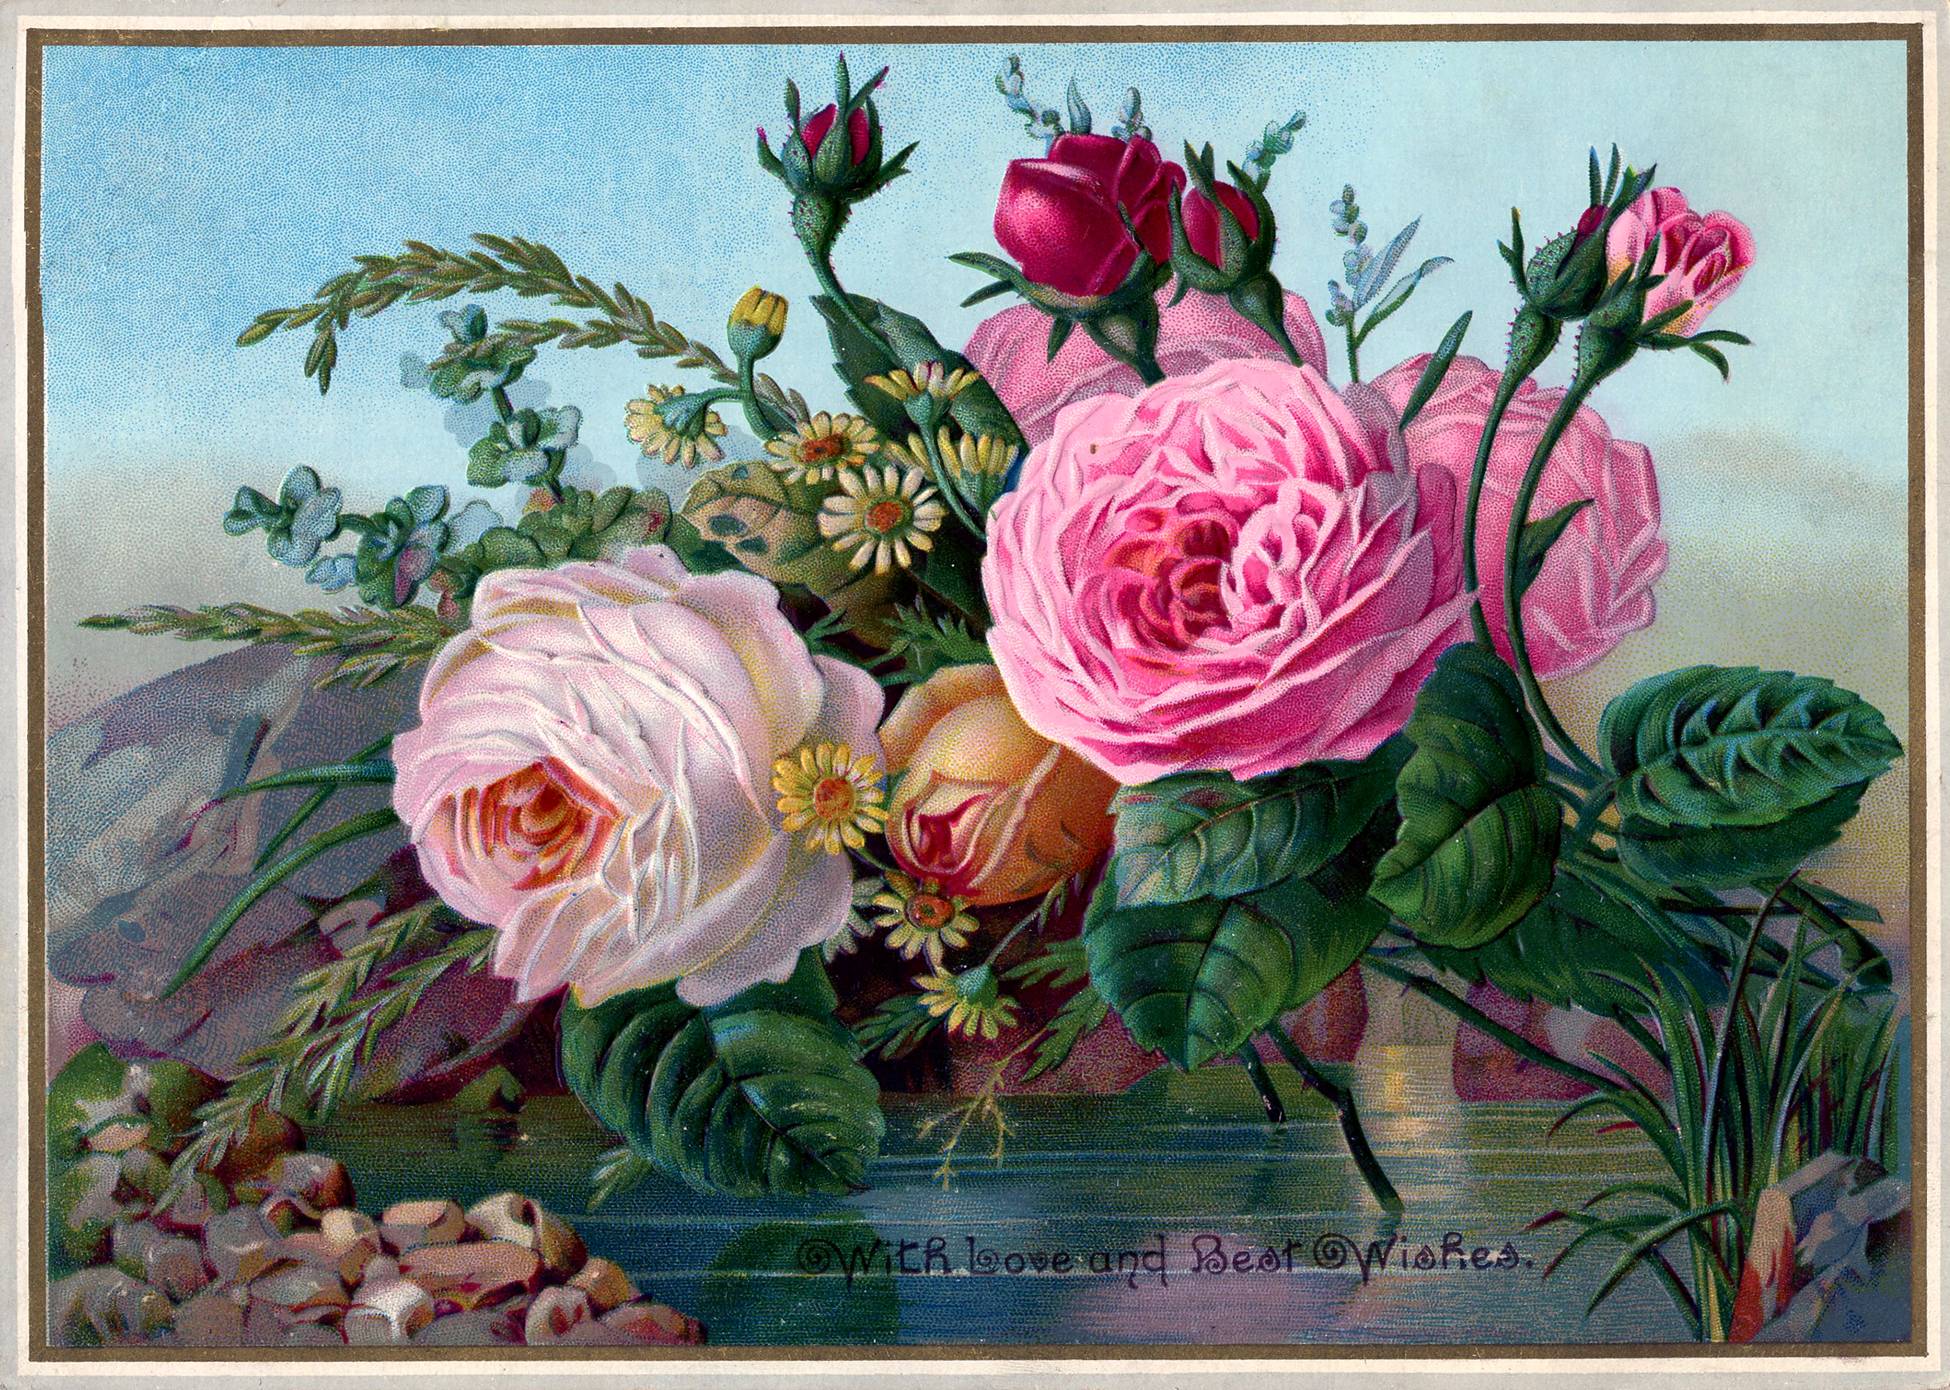 Free Public Domain Vintage Image - Stunning Roses - The Graphics ...